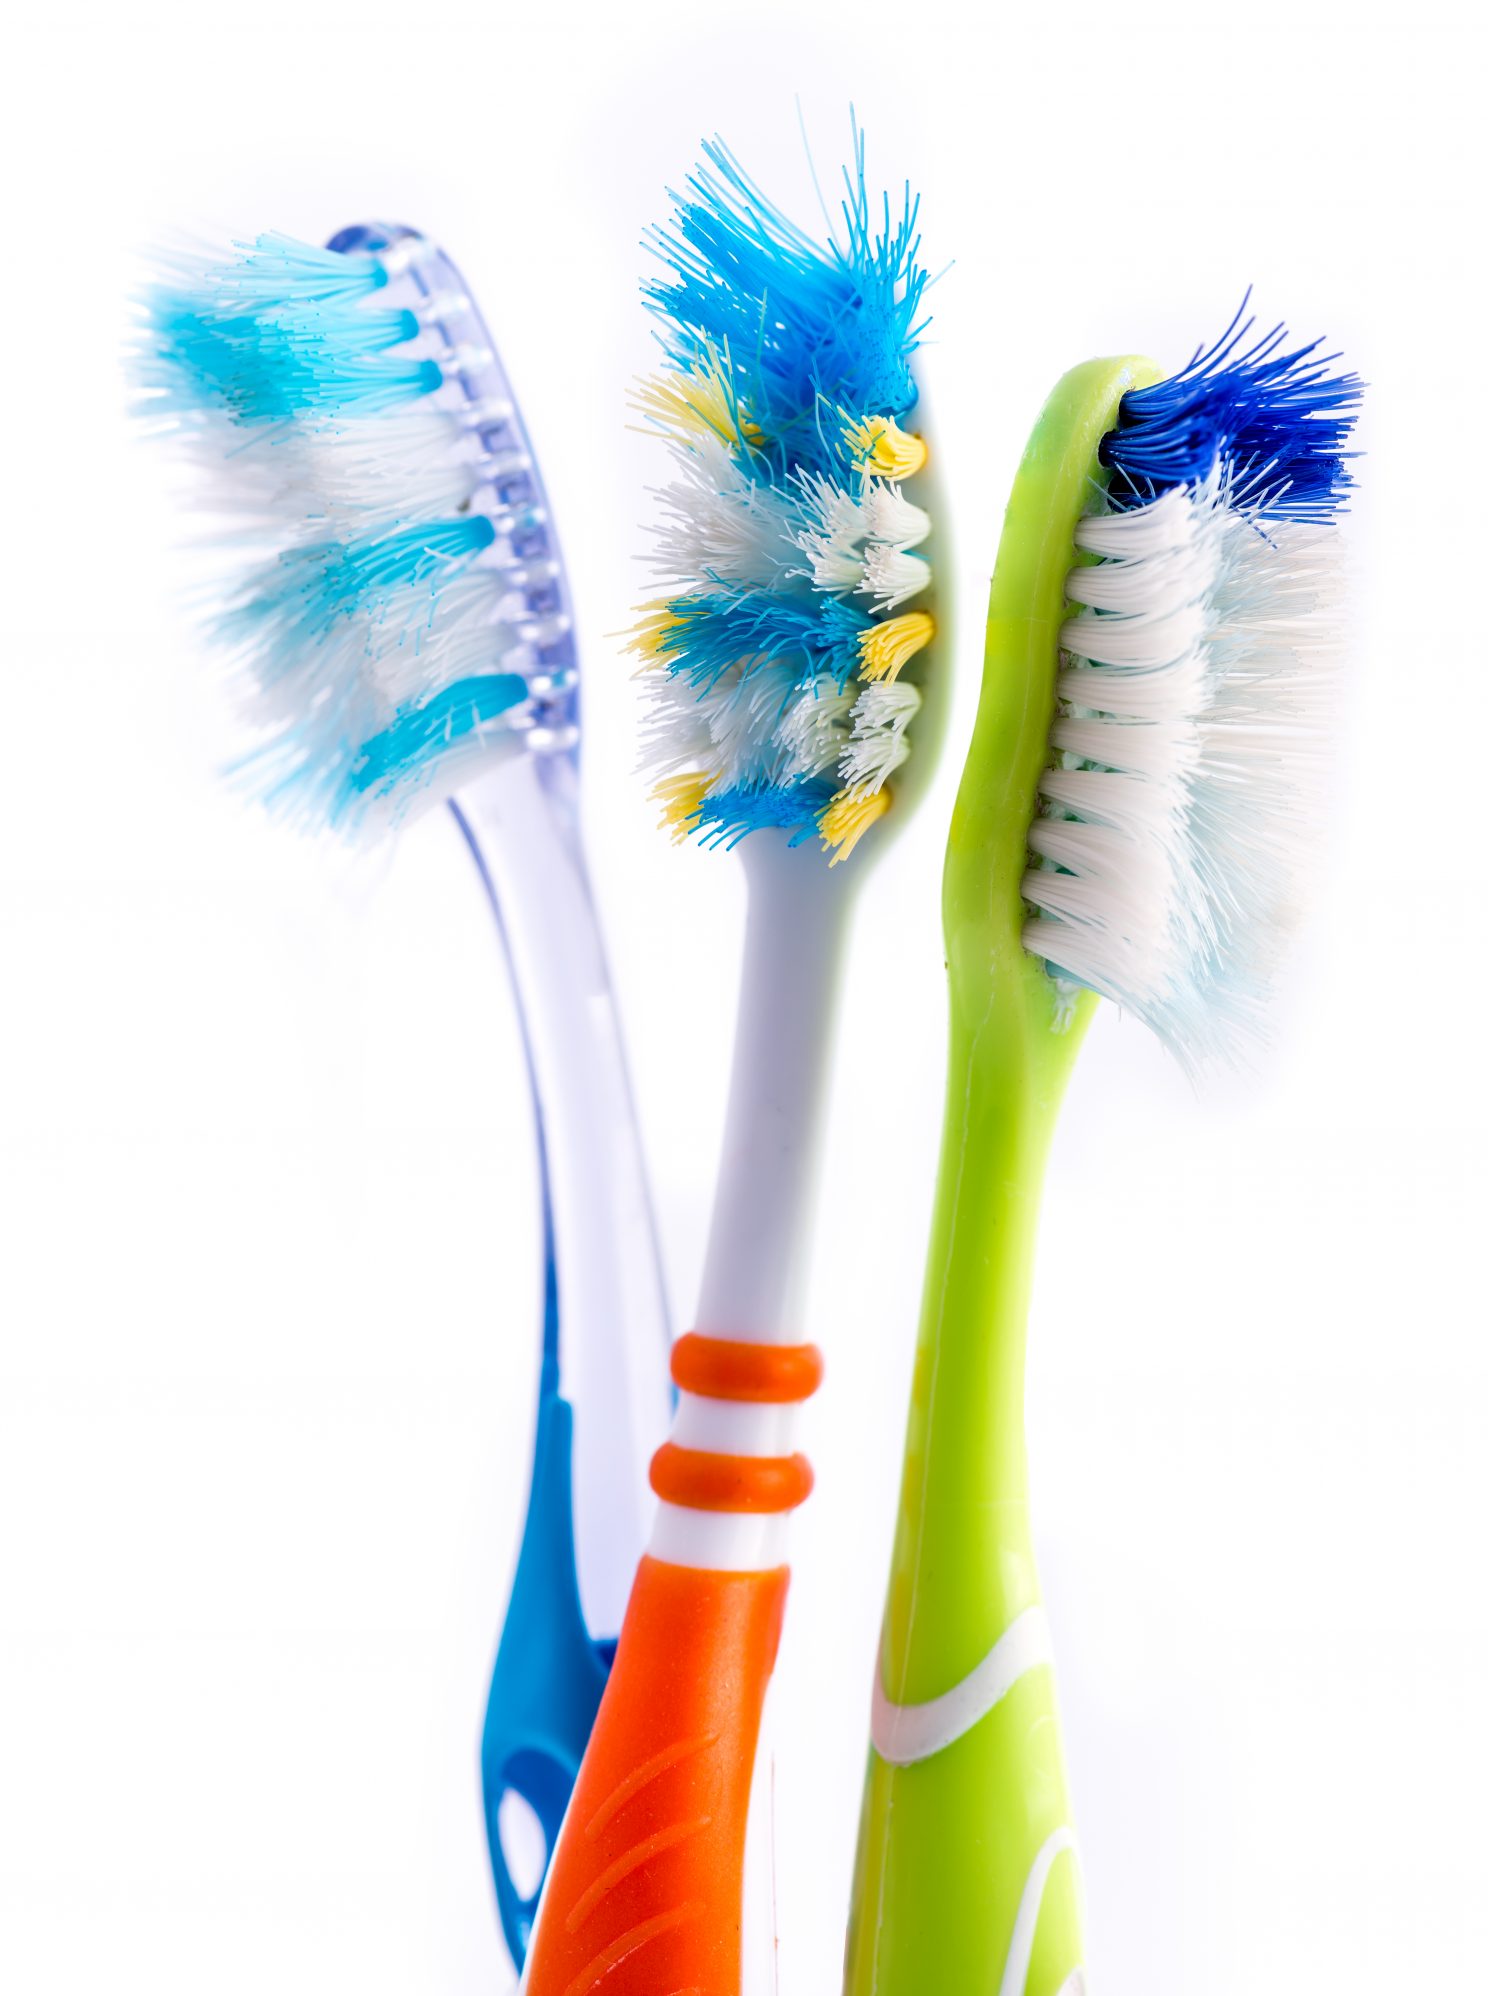 How Often Should You Change Your Toothbrush? 2